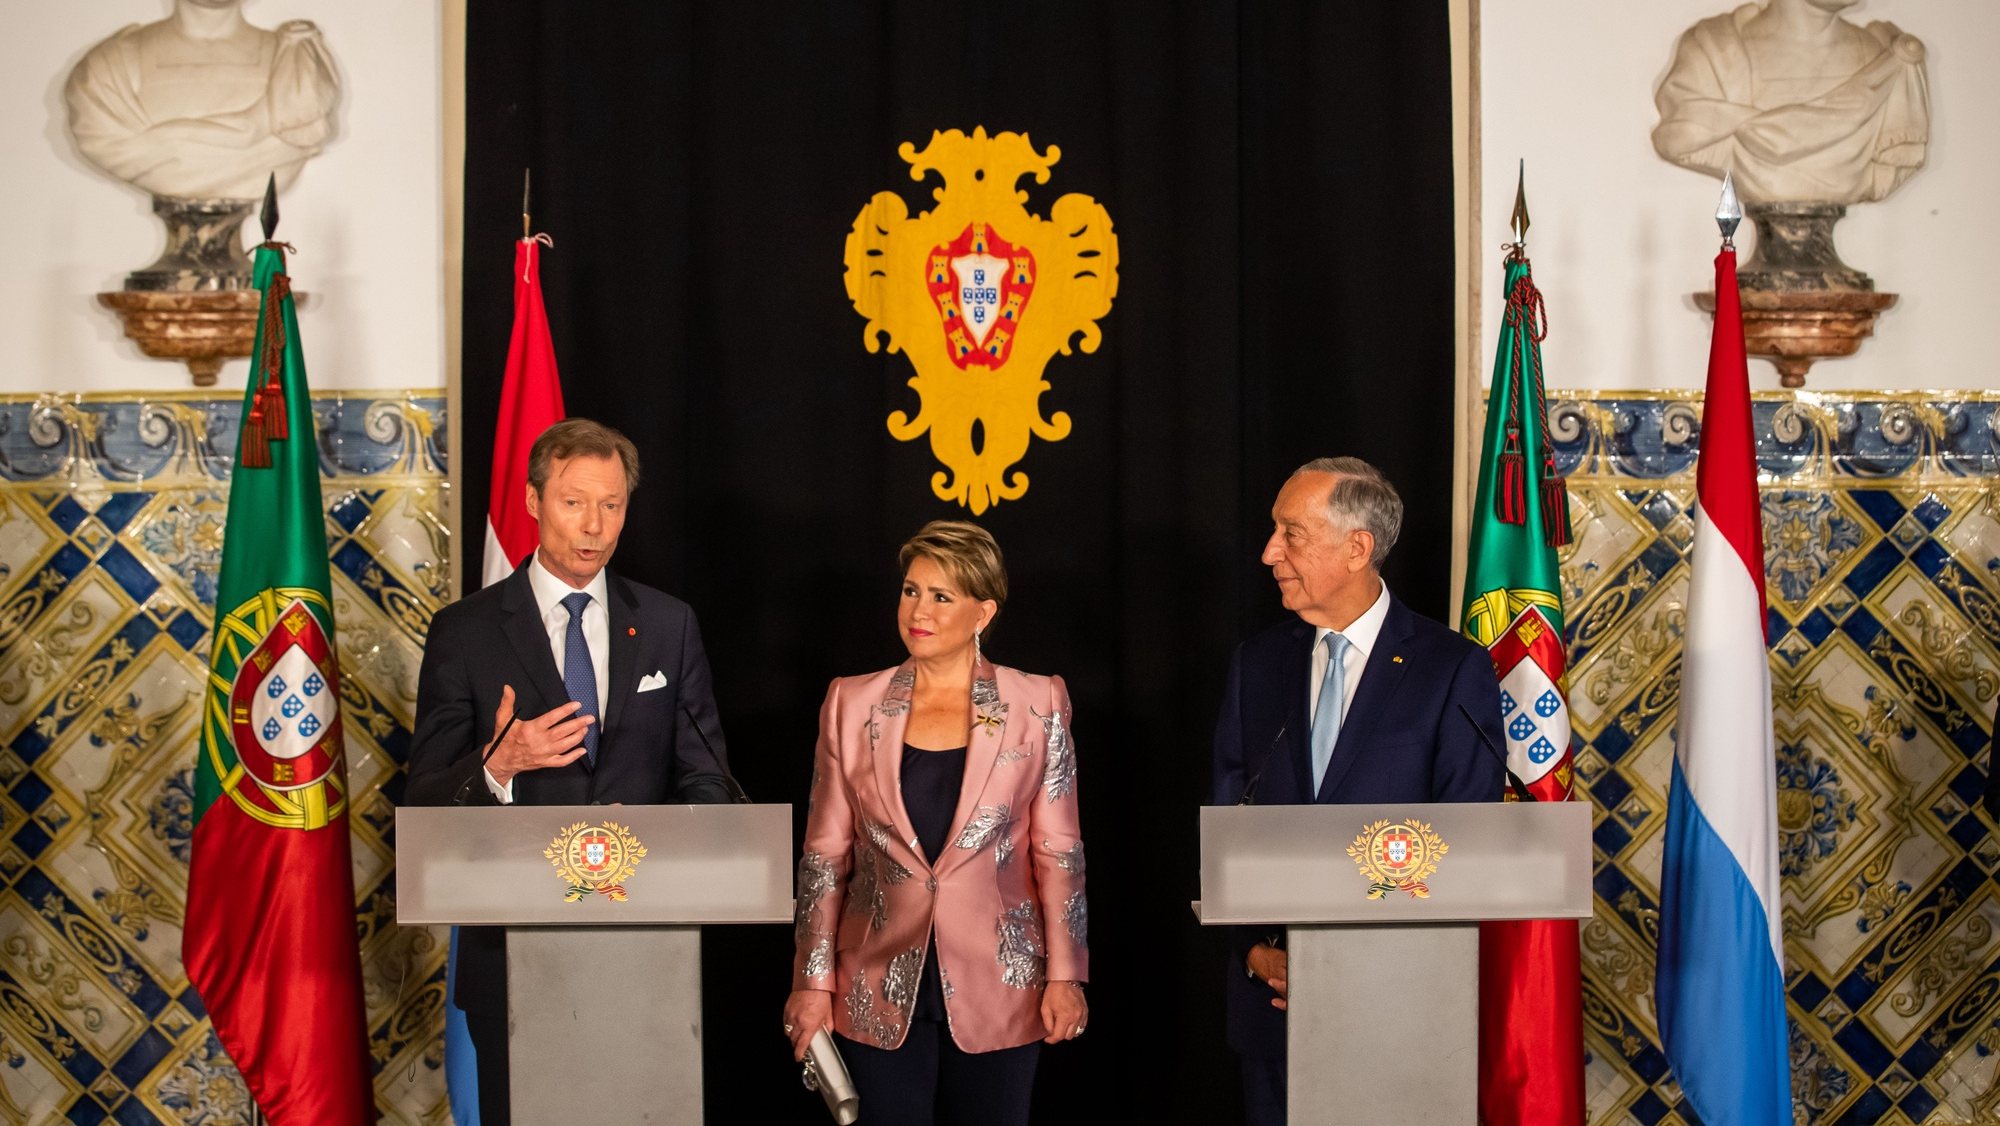 Portuguese President, Marcelo Rebelo de Sousa (R), during a joint press conference with the Grand Duke of Luxembourg, Henri (L), and his wife Maria Teresa Mestre e Batista, after a meeting at Belem Palace on the first day of a two day visit to Portugal, in Lisbon, 11 May 2022. JOSE SENA GOULAO/LUSA